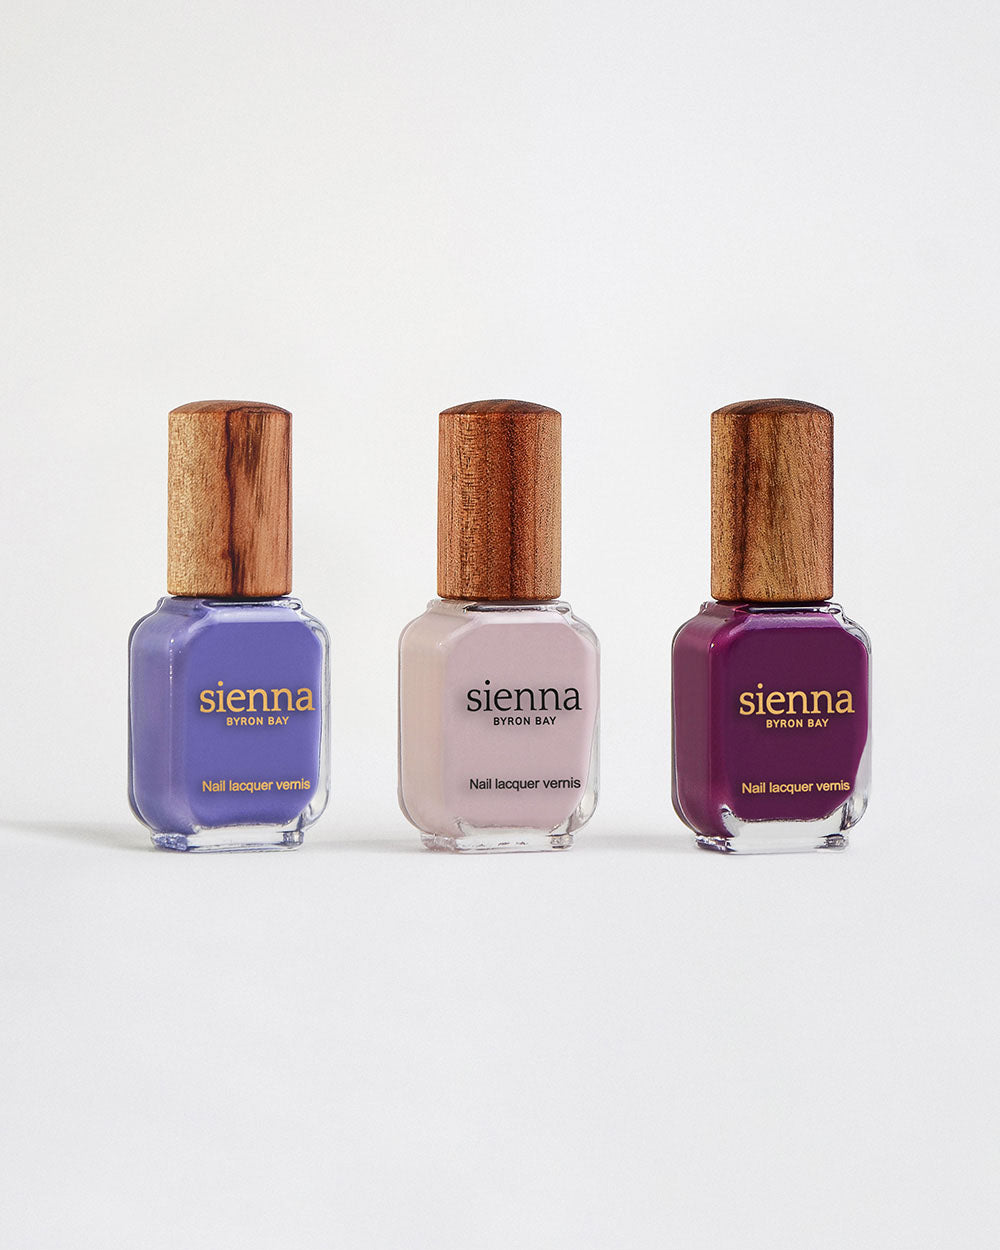 The Quiet Trio Gentle Midtone Blue Lilac Crème, Tranquility Light Mauve Rose Crème, Reverence Violet Grape Crème nail polish bottles with timber lid by Sienna Byron Bay.